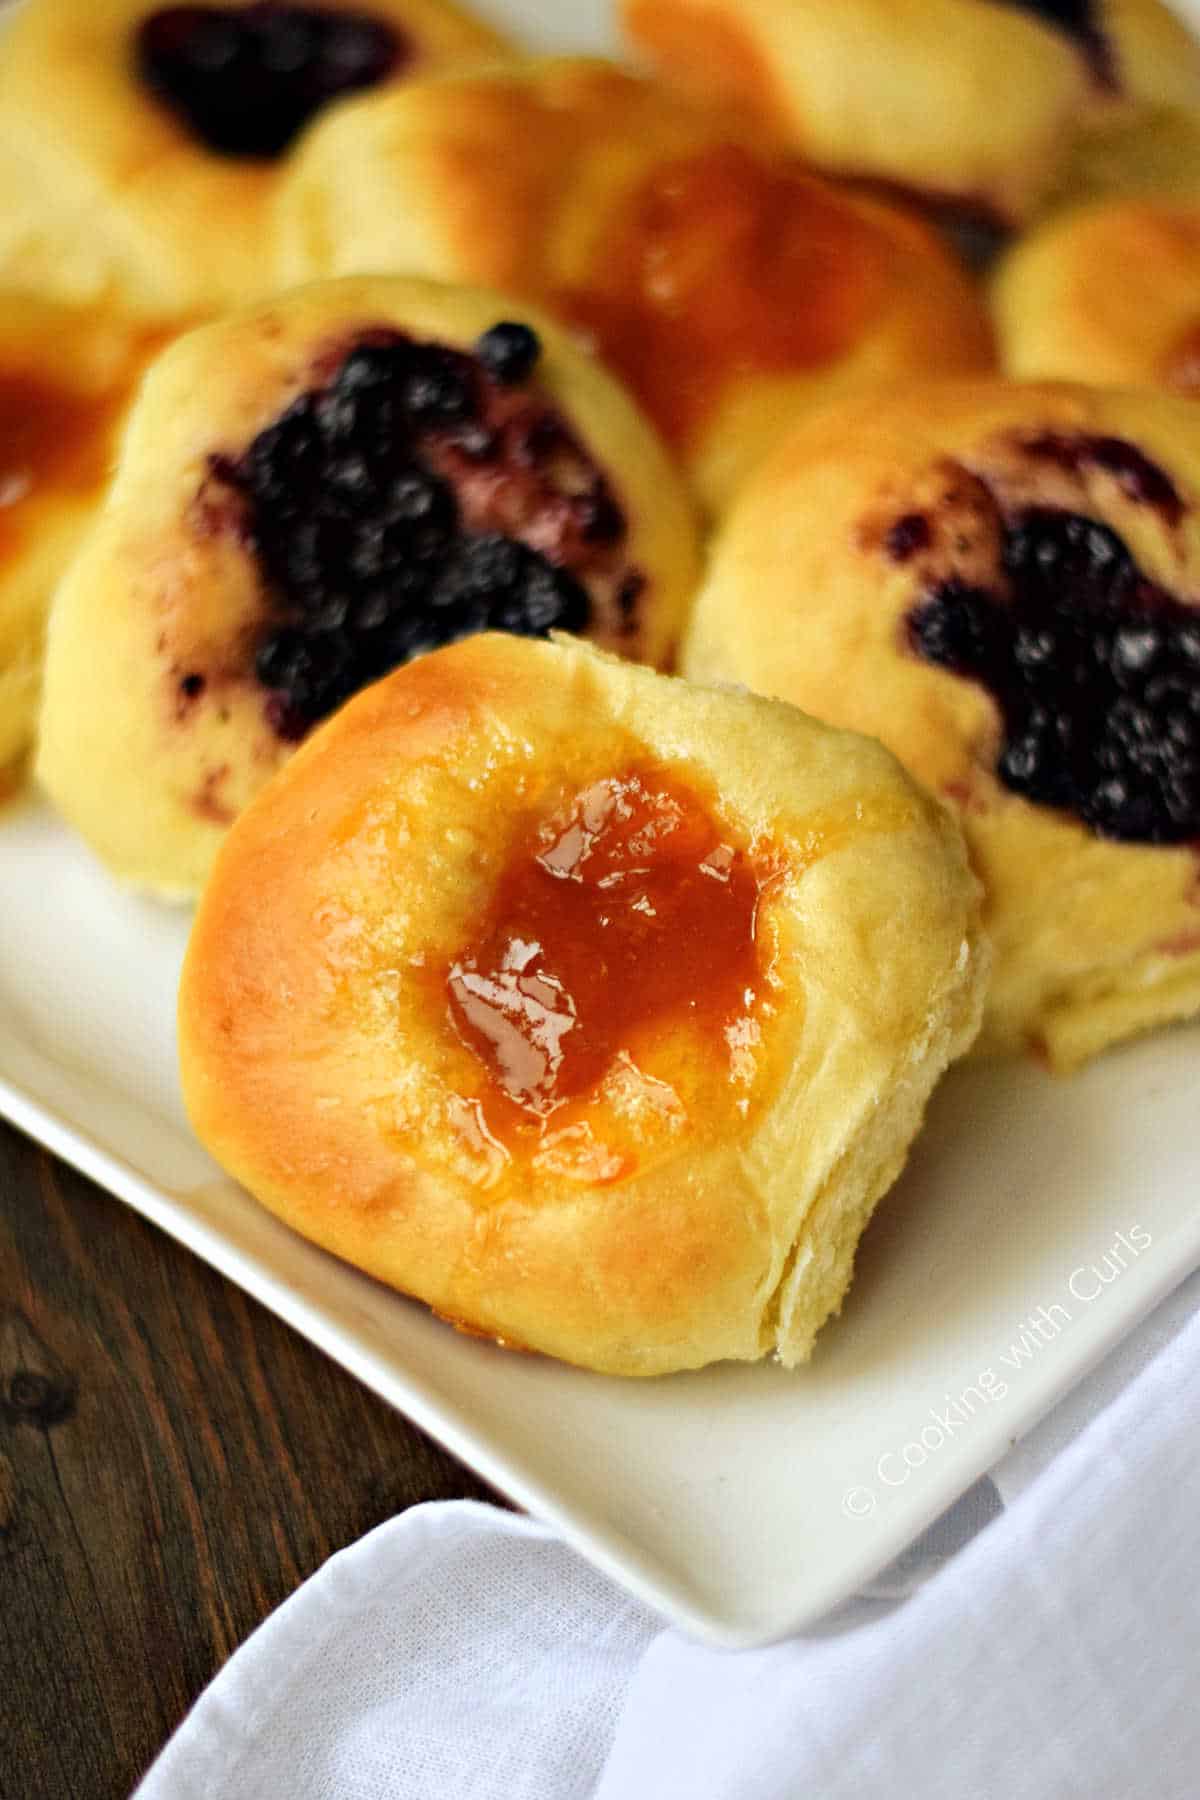 A plate full of blueberry and apricot kolaches.